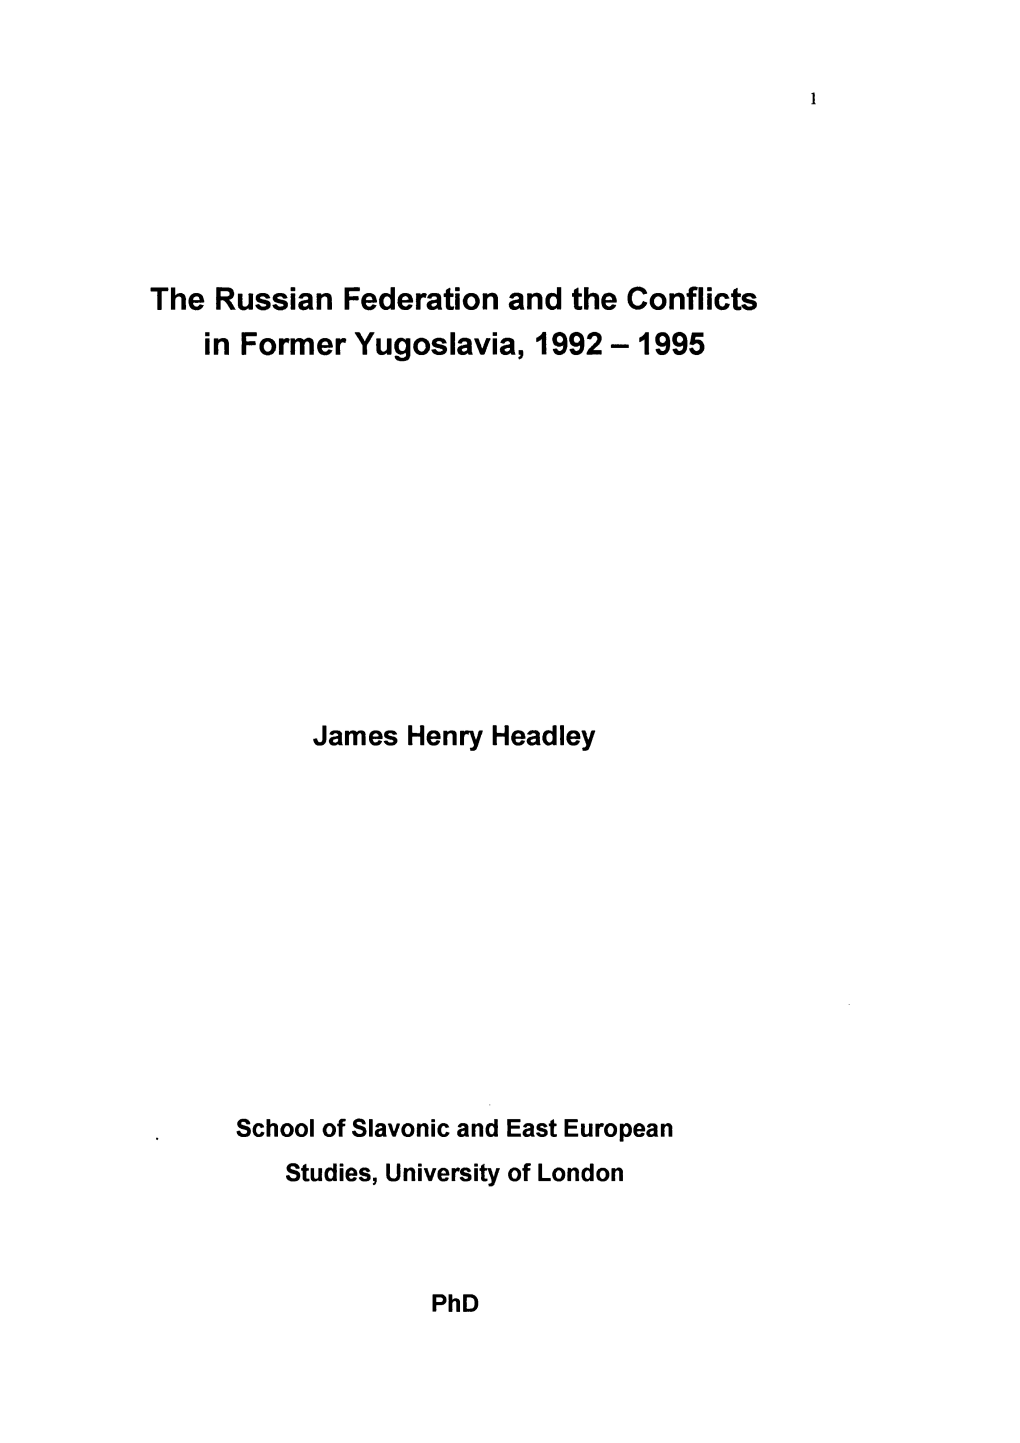 The Russian Federation and the Conflicts in Former Yugoslavia, 1992 - 1995